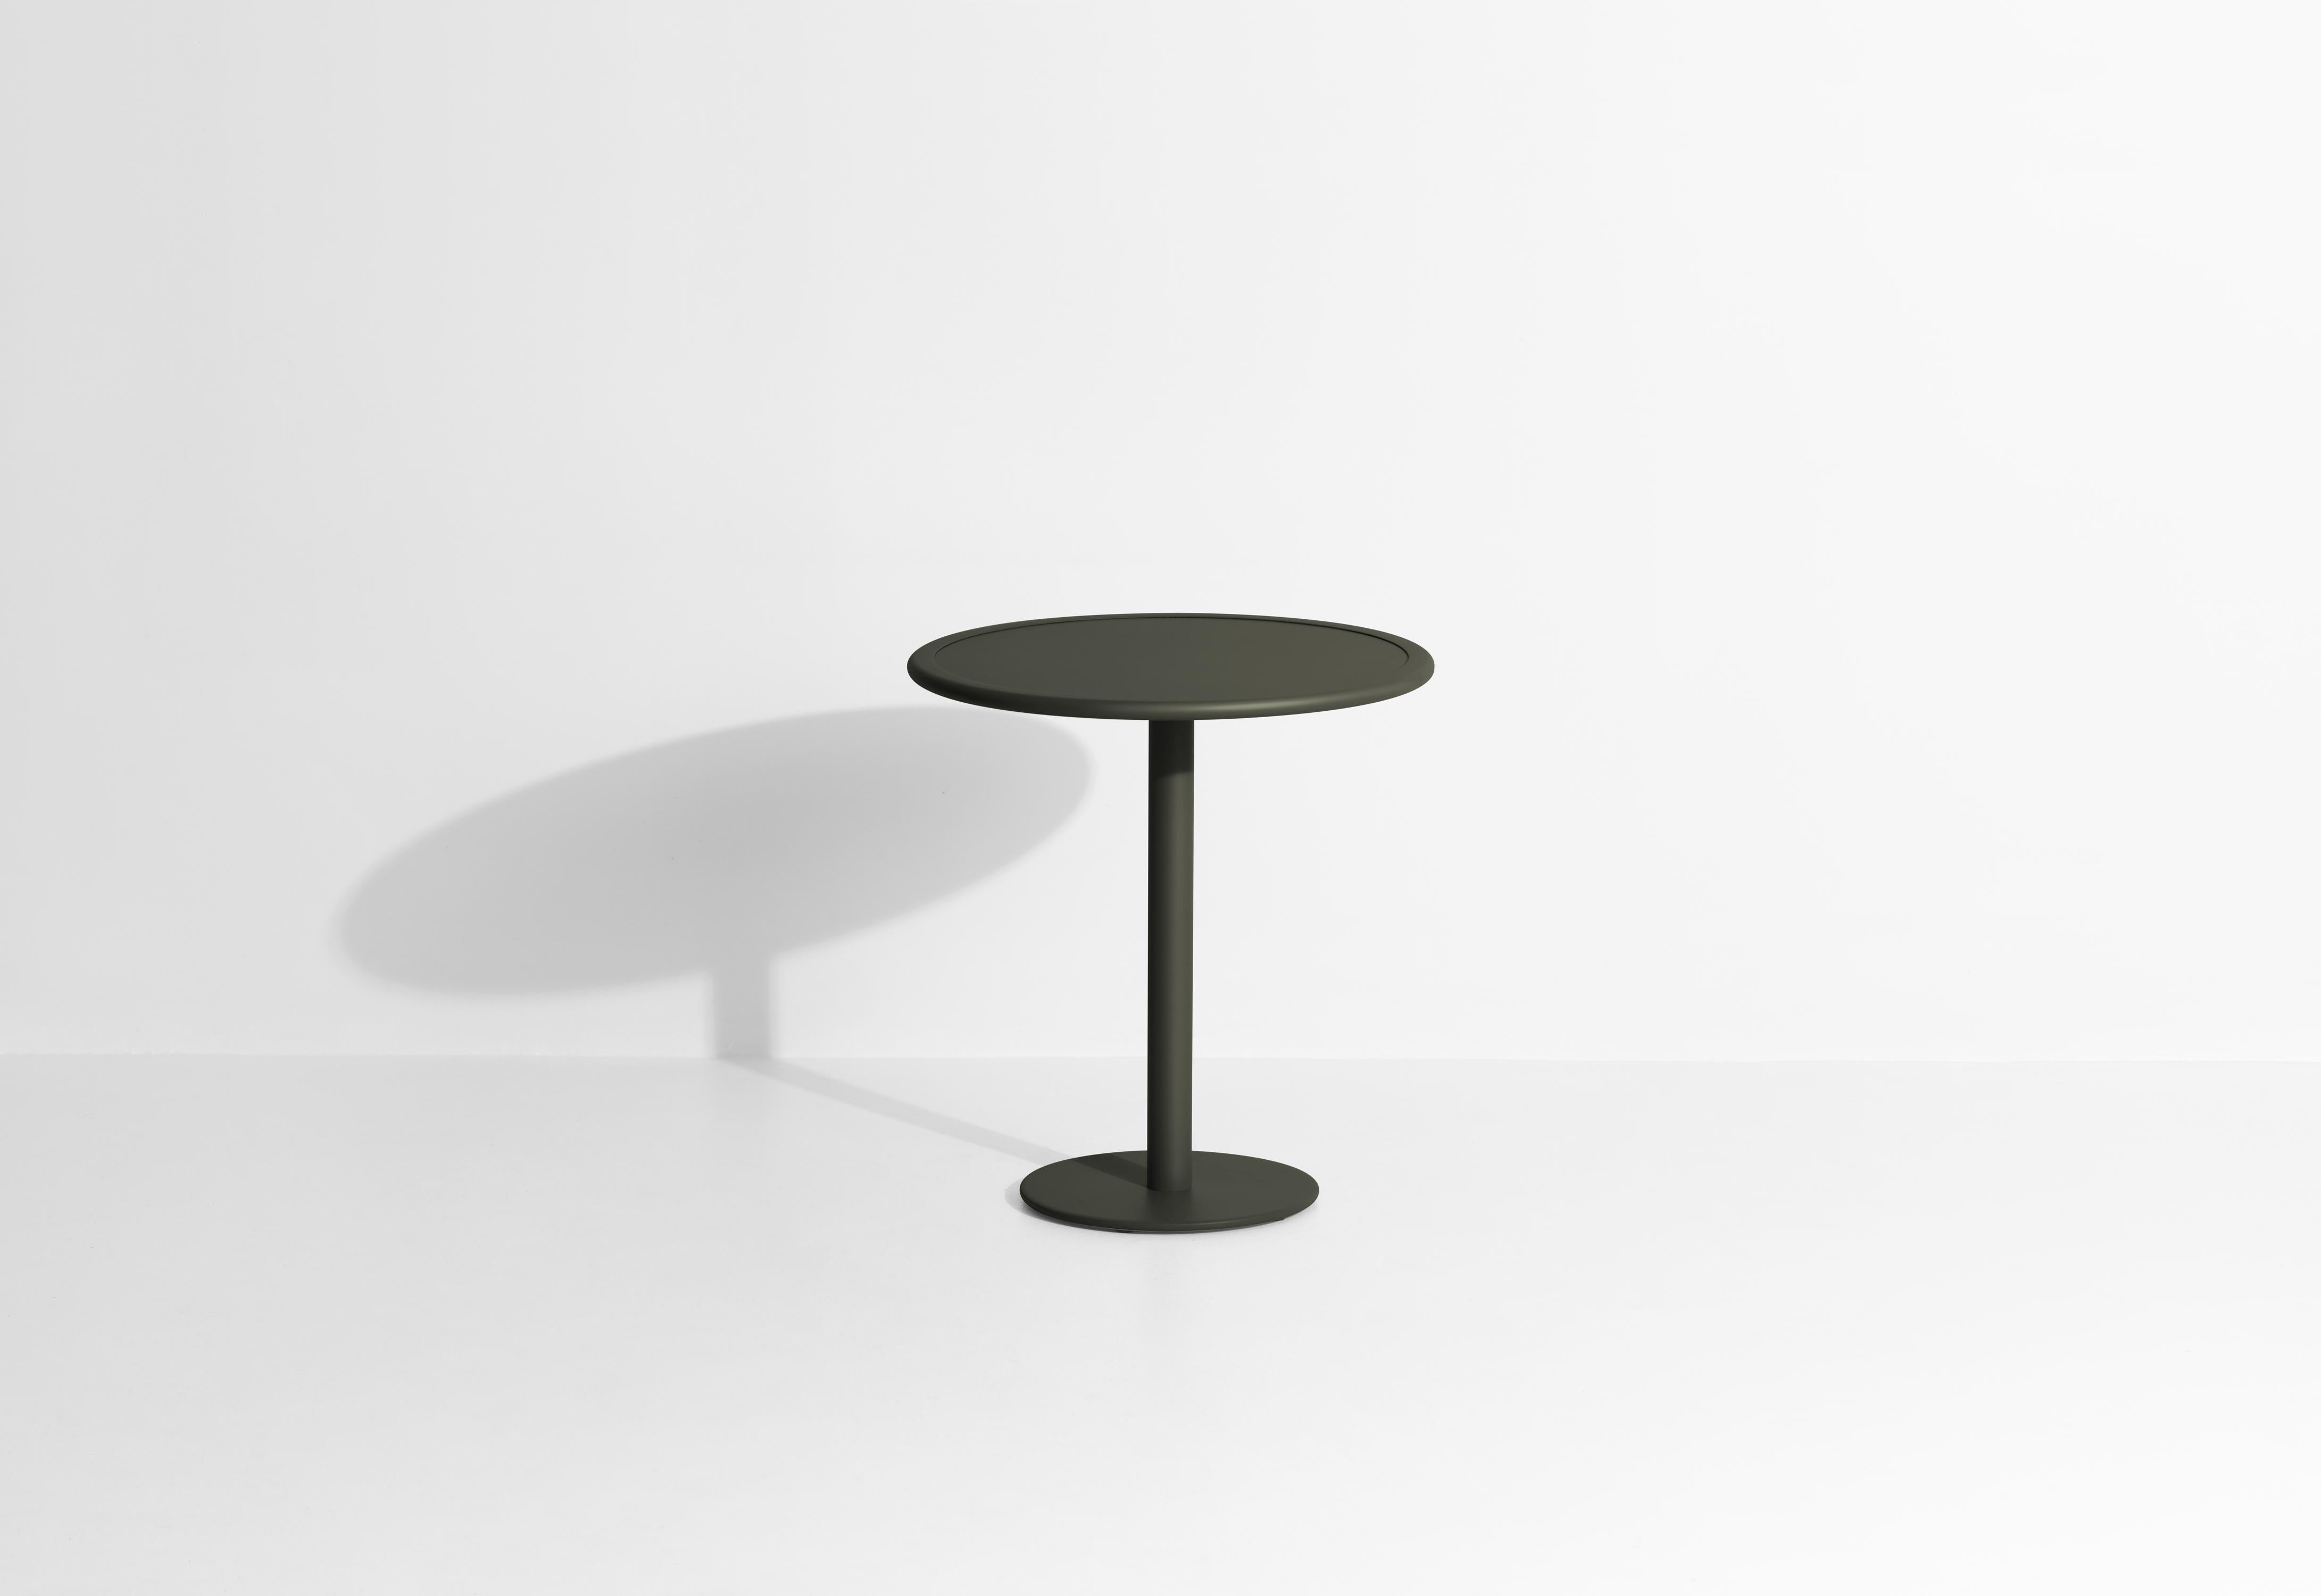 Petite Friture Week-End Bistro Round Dining Table in Glass Green Aluminium by Studio BrichetZiegler, 2017

The week-end collection is a full range of outdoor furniture, in aluminium grained epoxy paint, matt finish, that includes 18 functions and